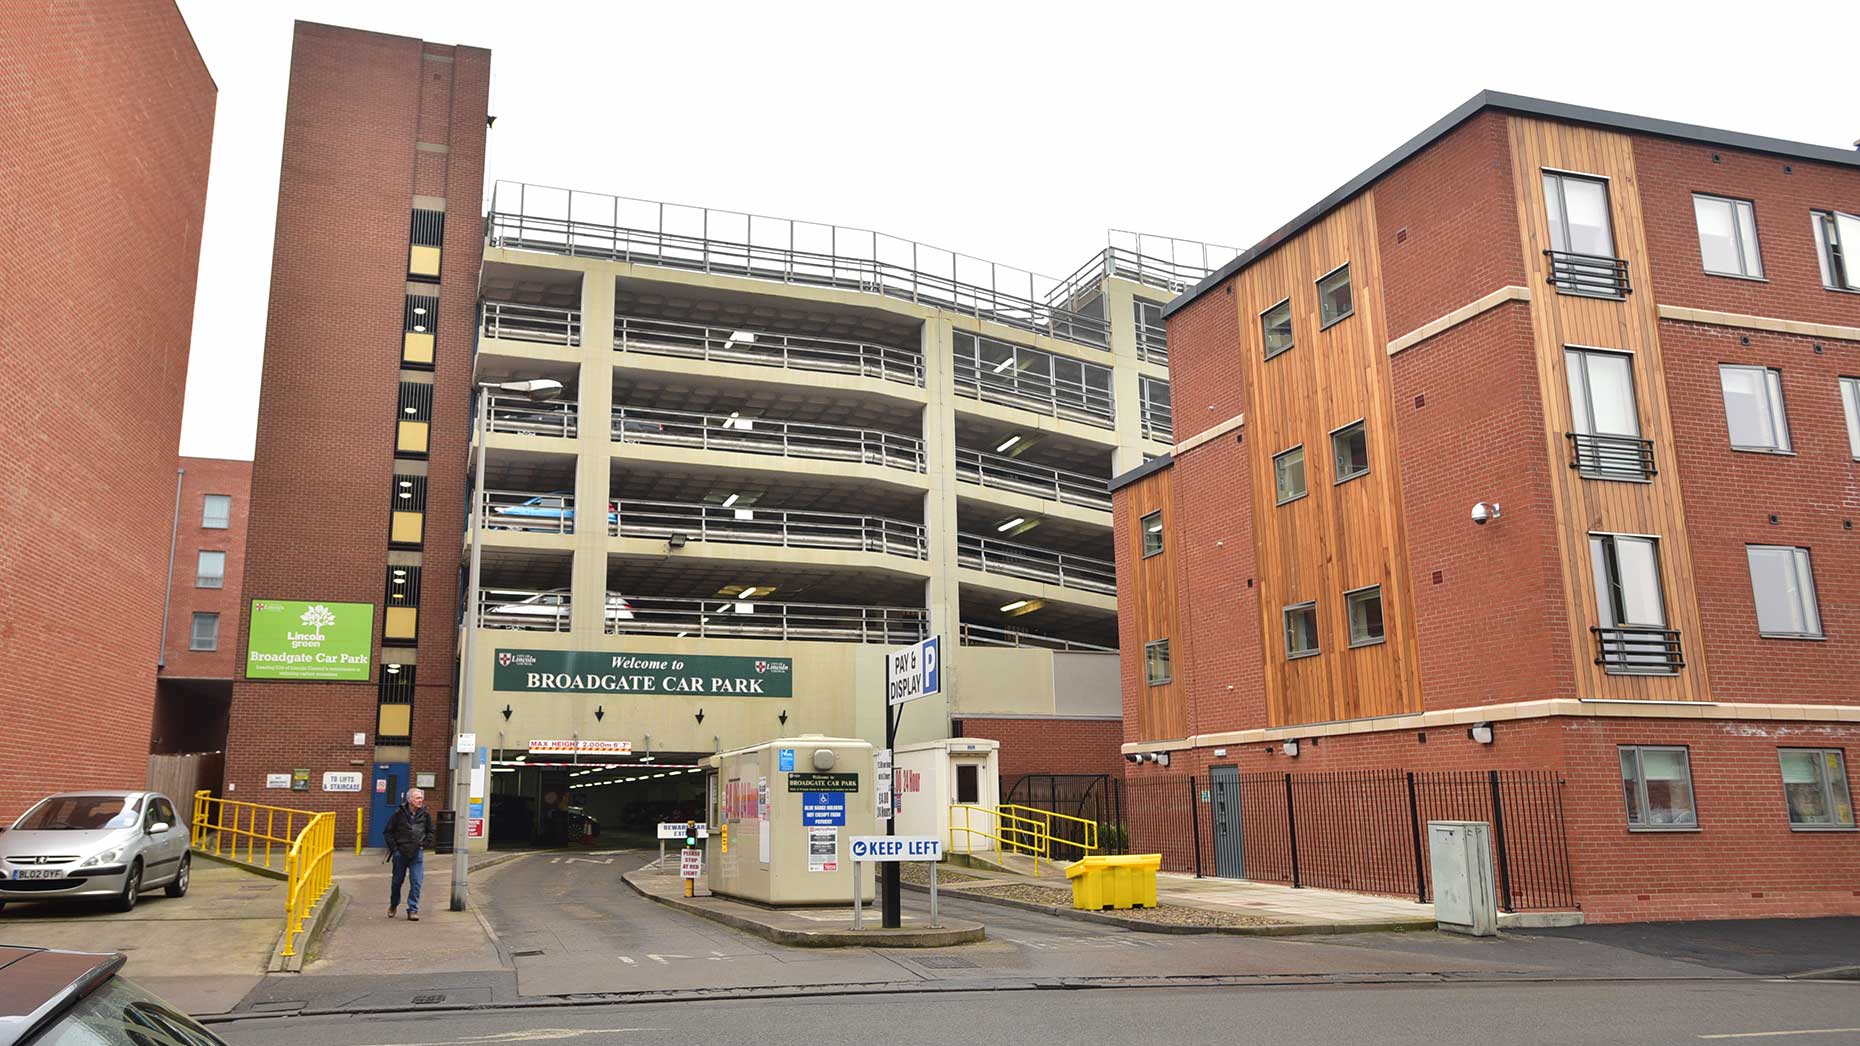 Broadgate Car Park in Lincoln. Photo: Steve Smailes for The Lincolnite